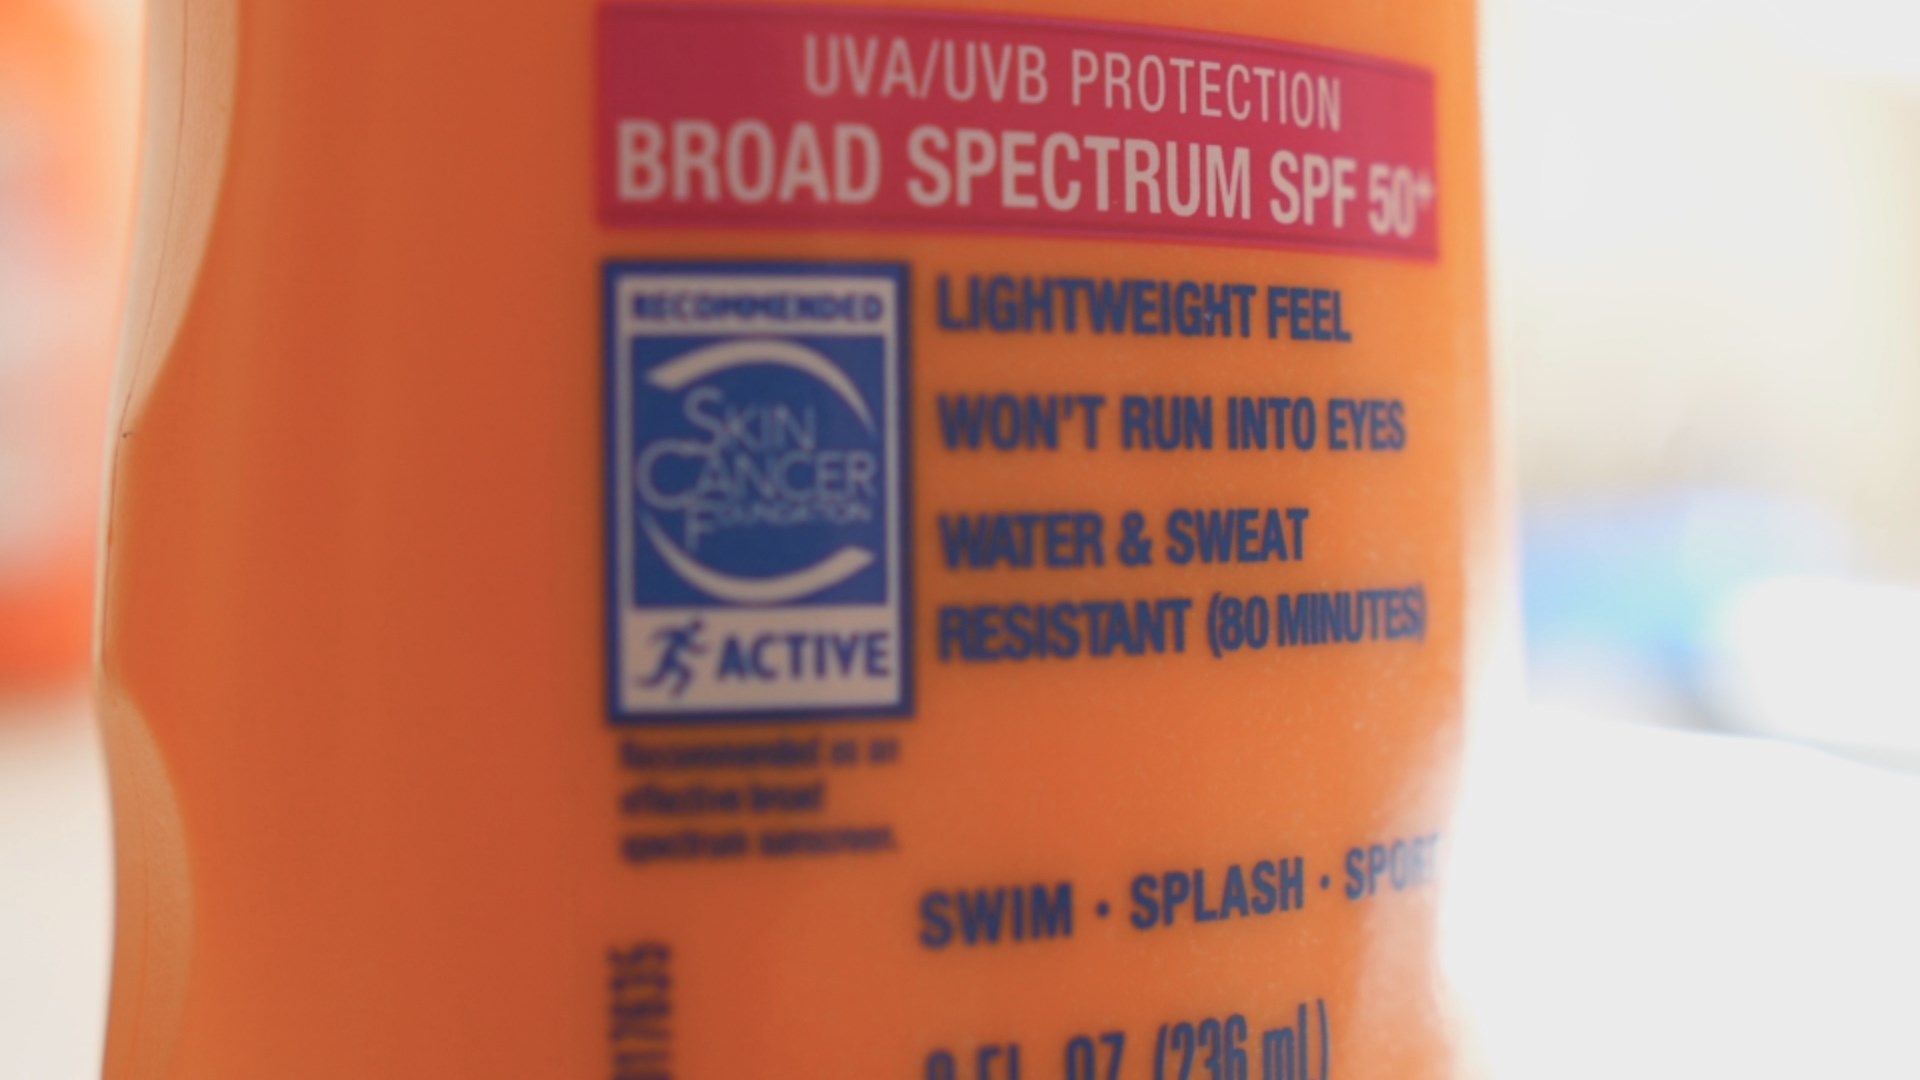 Label on a bottle of sunscreen